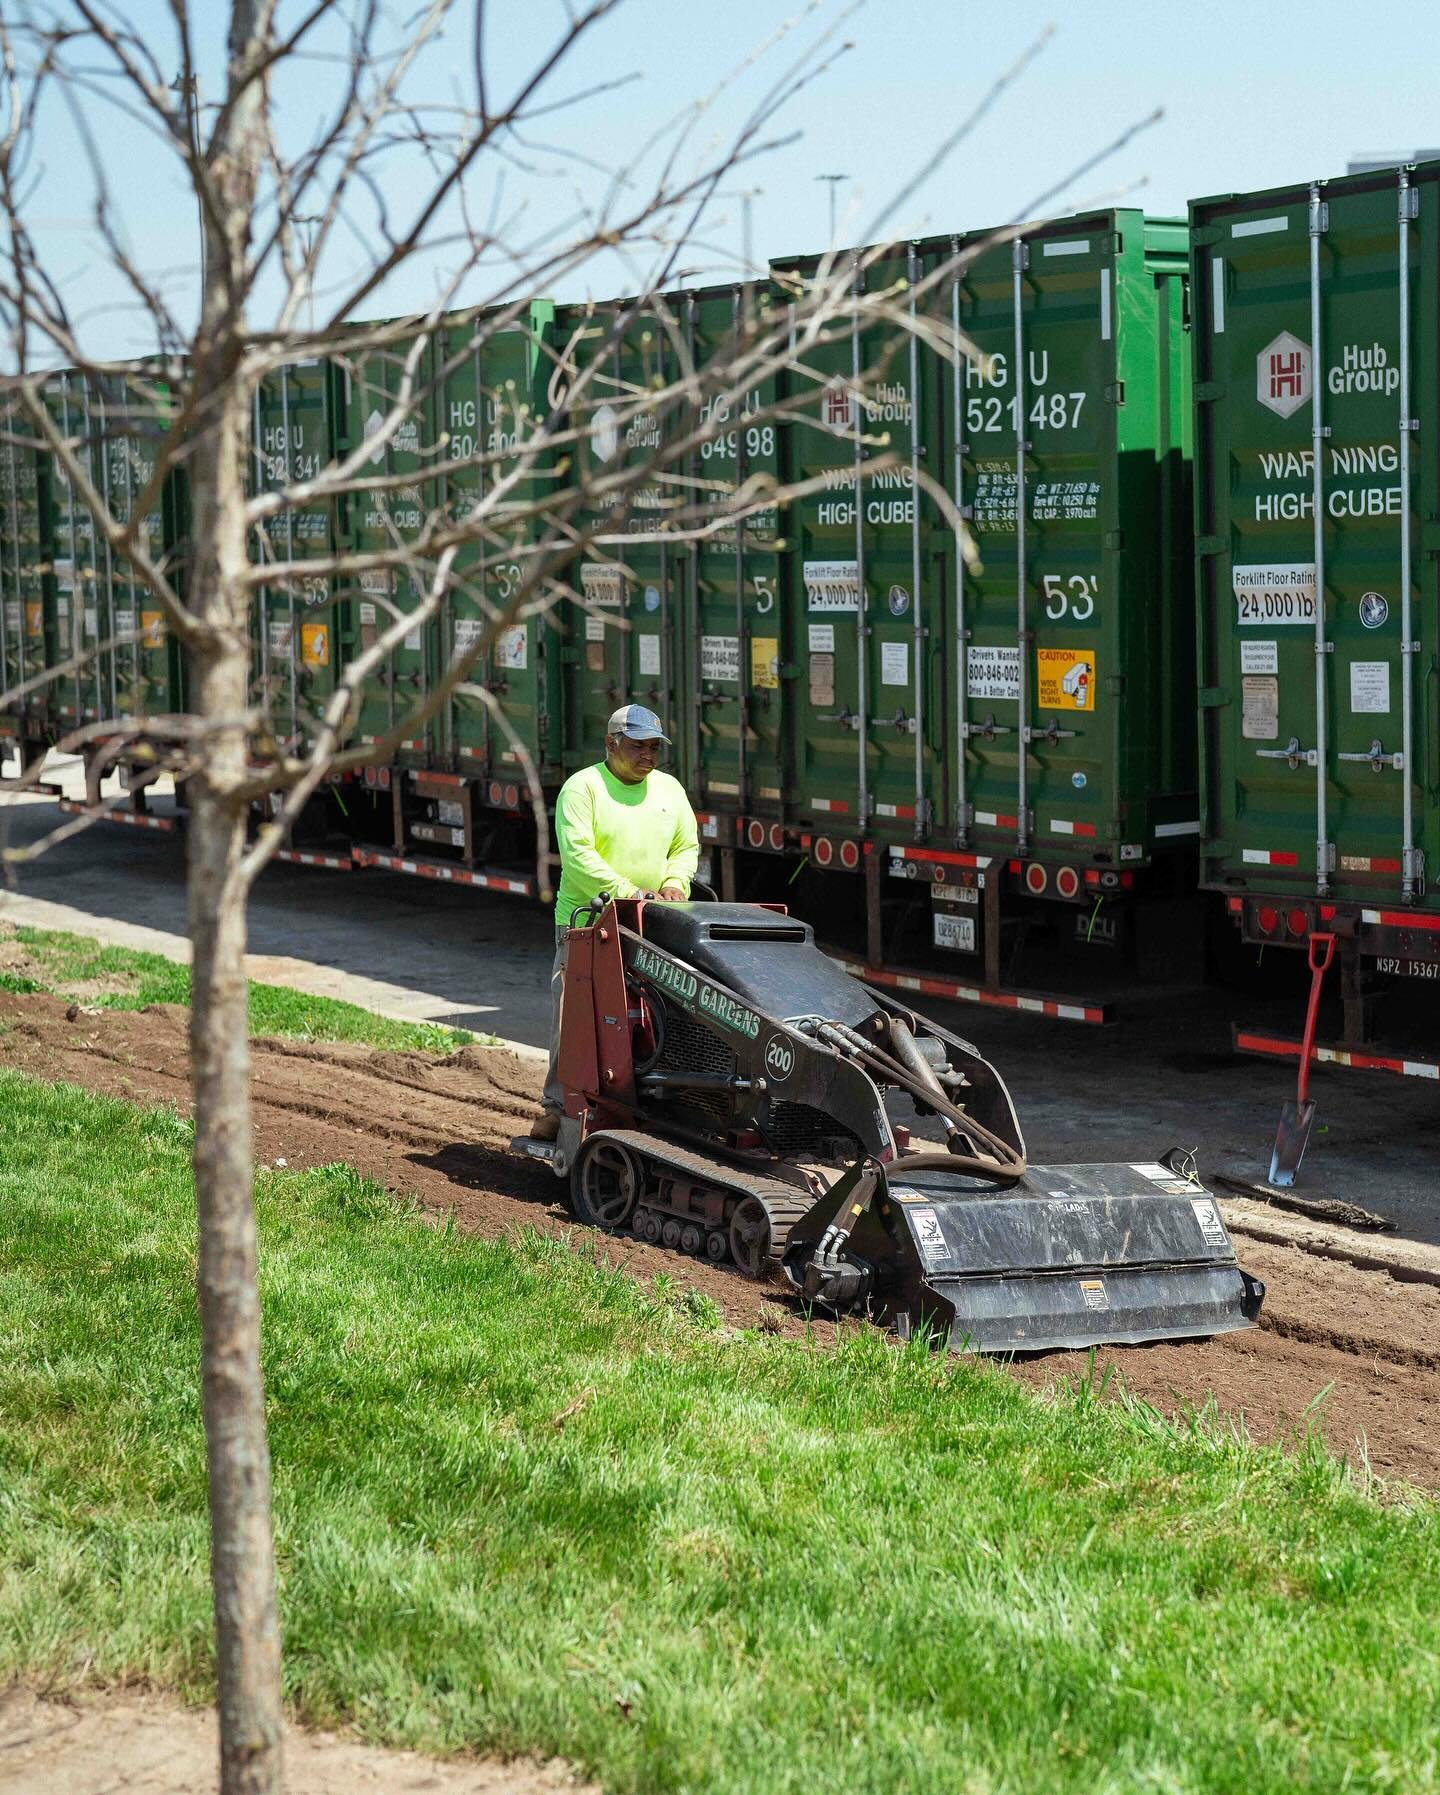 Prepping the soil for optimal germination while our freshly planted Acer Rubrum trees take root! #MayfieldGardens

#landscaping #landscapeslovers #landscapedesign #plants #nursery #mainline #philadelphia #trees